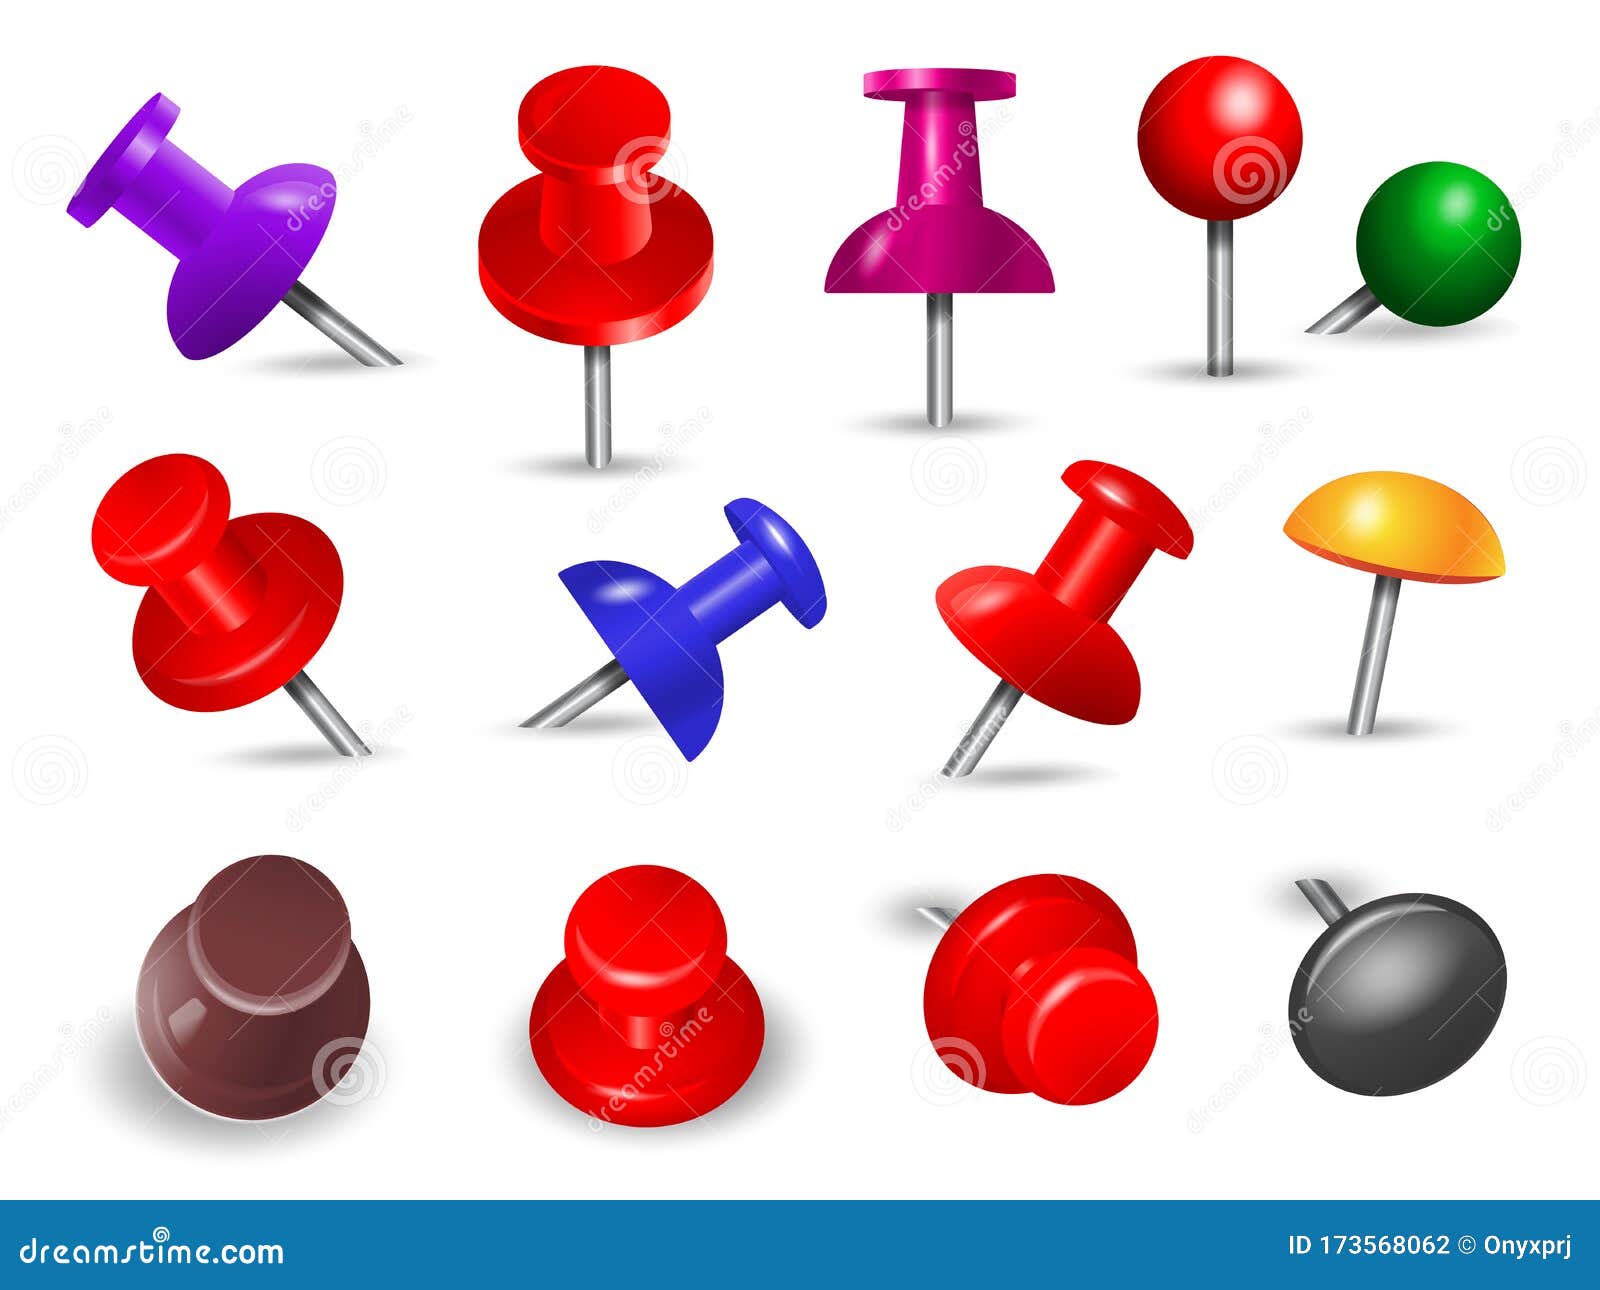 Red Thumbtack. Office Supplies for Paper Note Push and Attachments